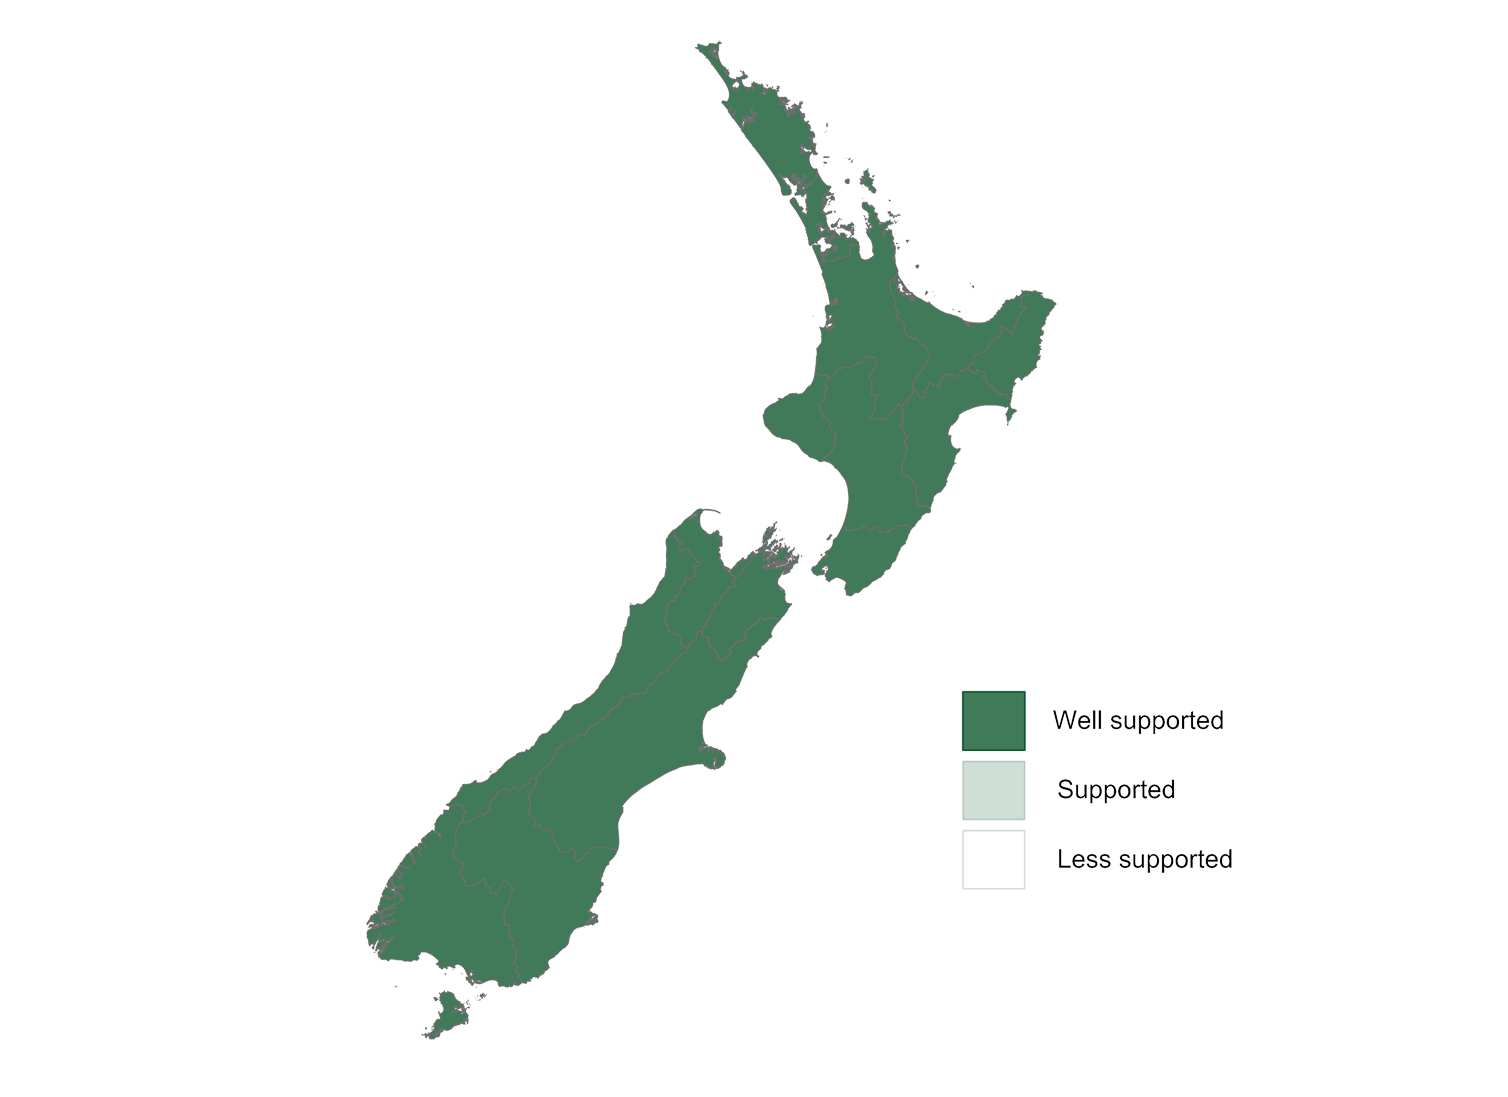 New Zealand map showing that growing mānuka is supported in all regions.